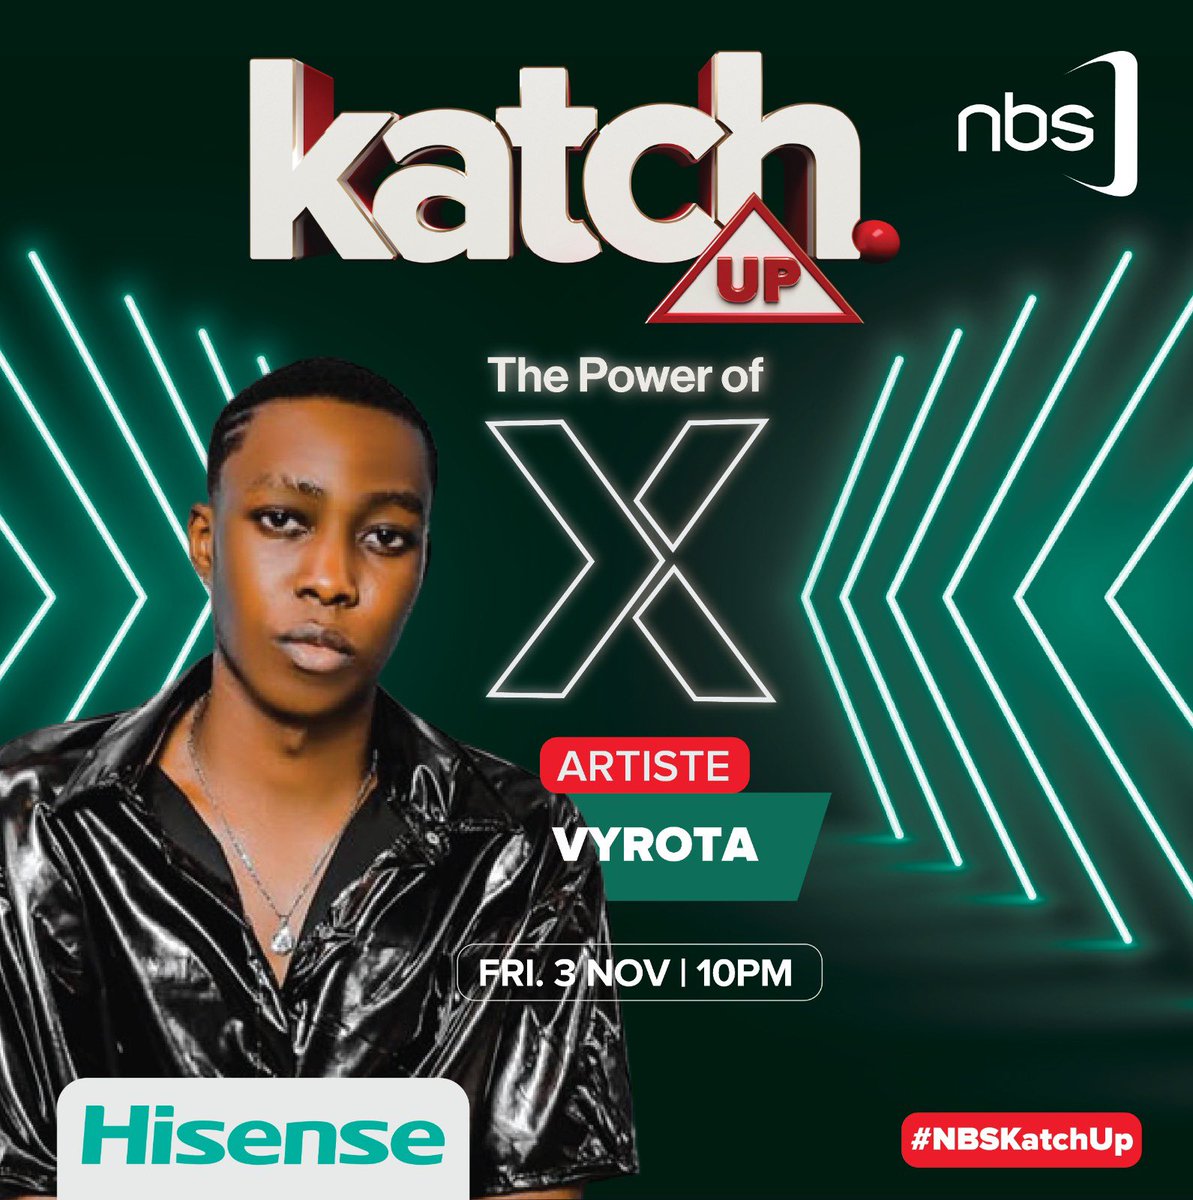 Join us for special performances from @vyroota on #NBSKatchUp tonight.

Time: 10 pm till late

#ThePowerOfX